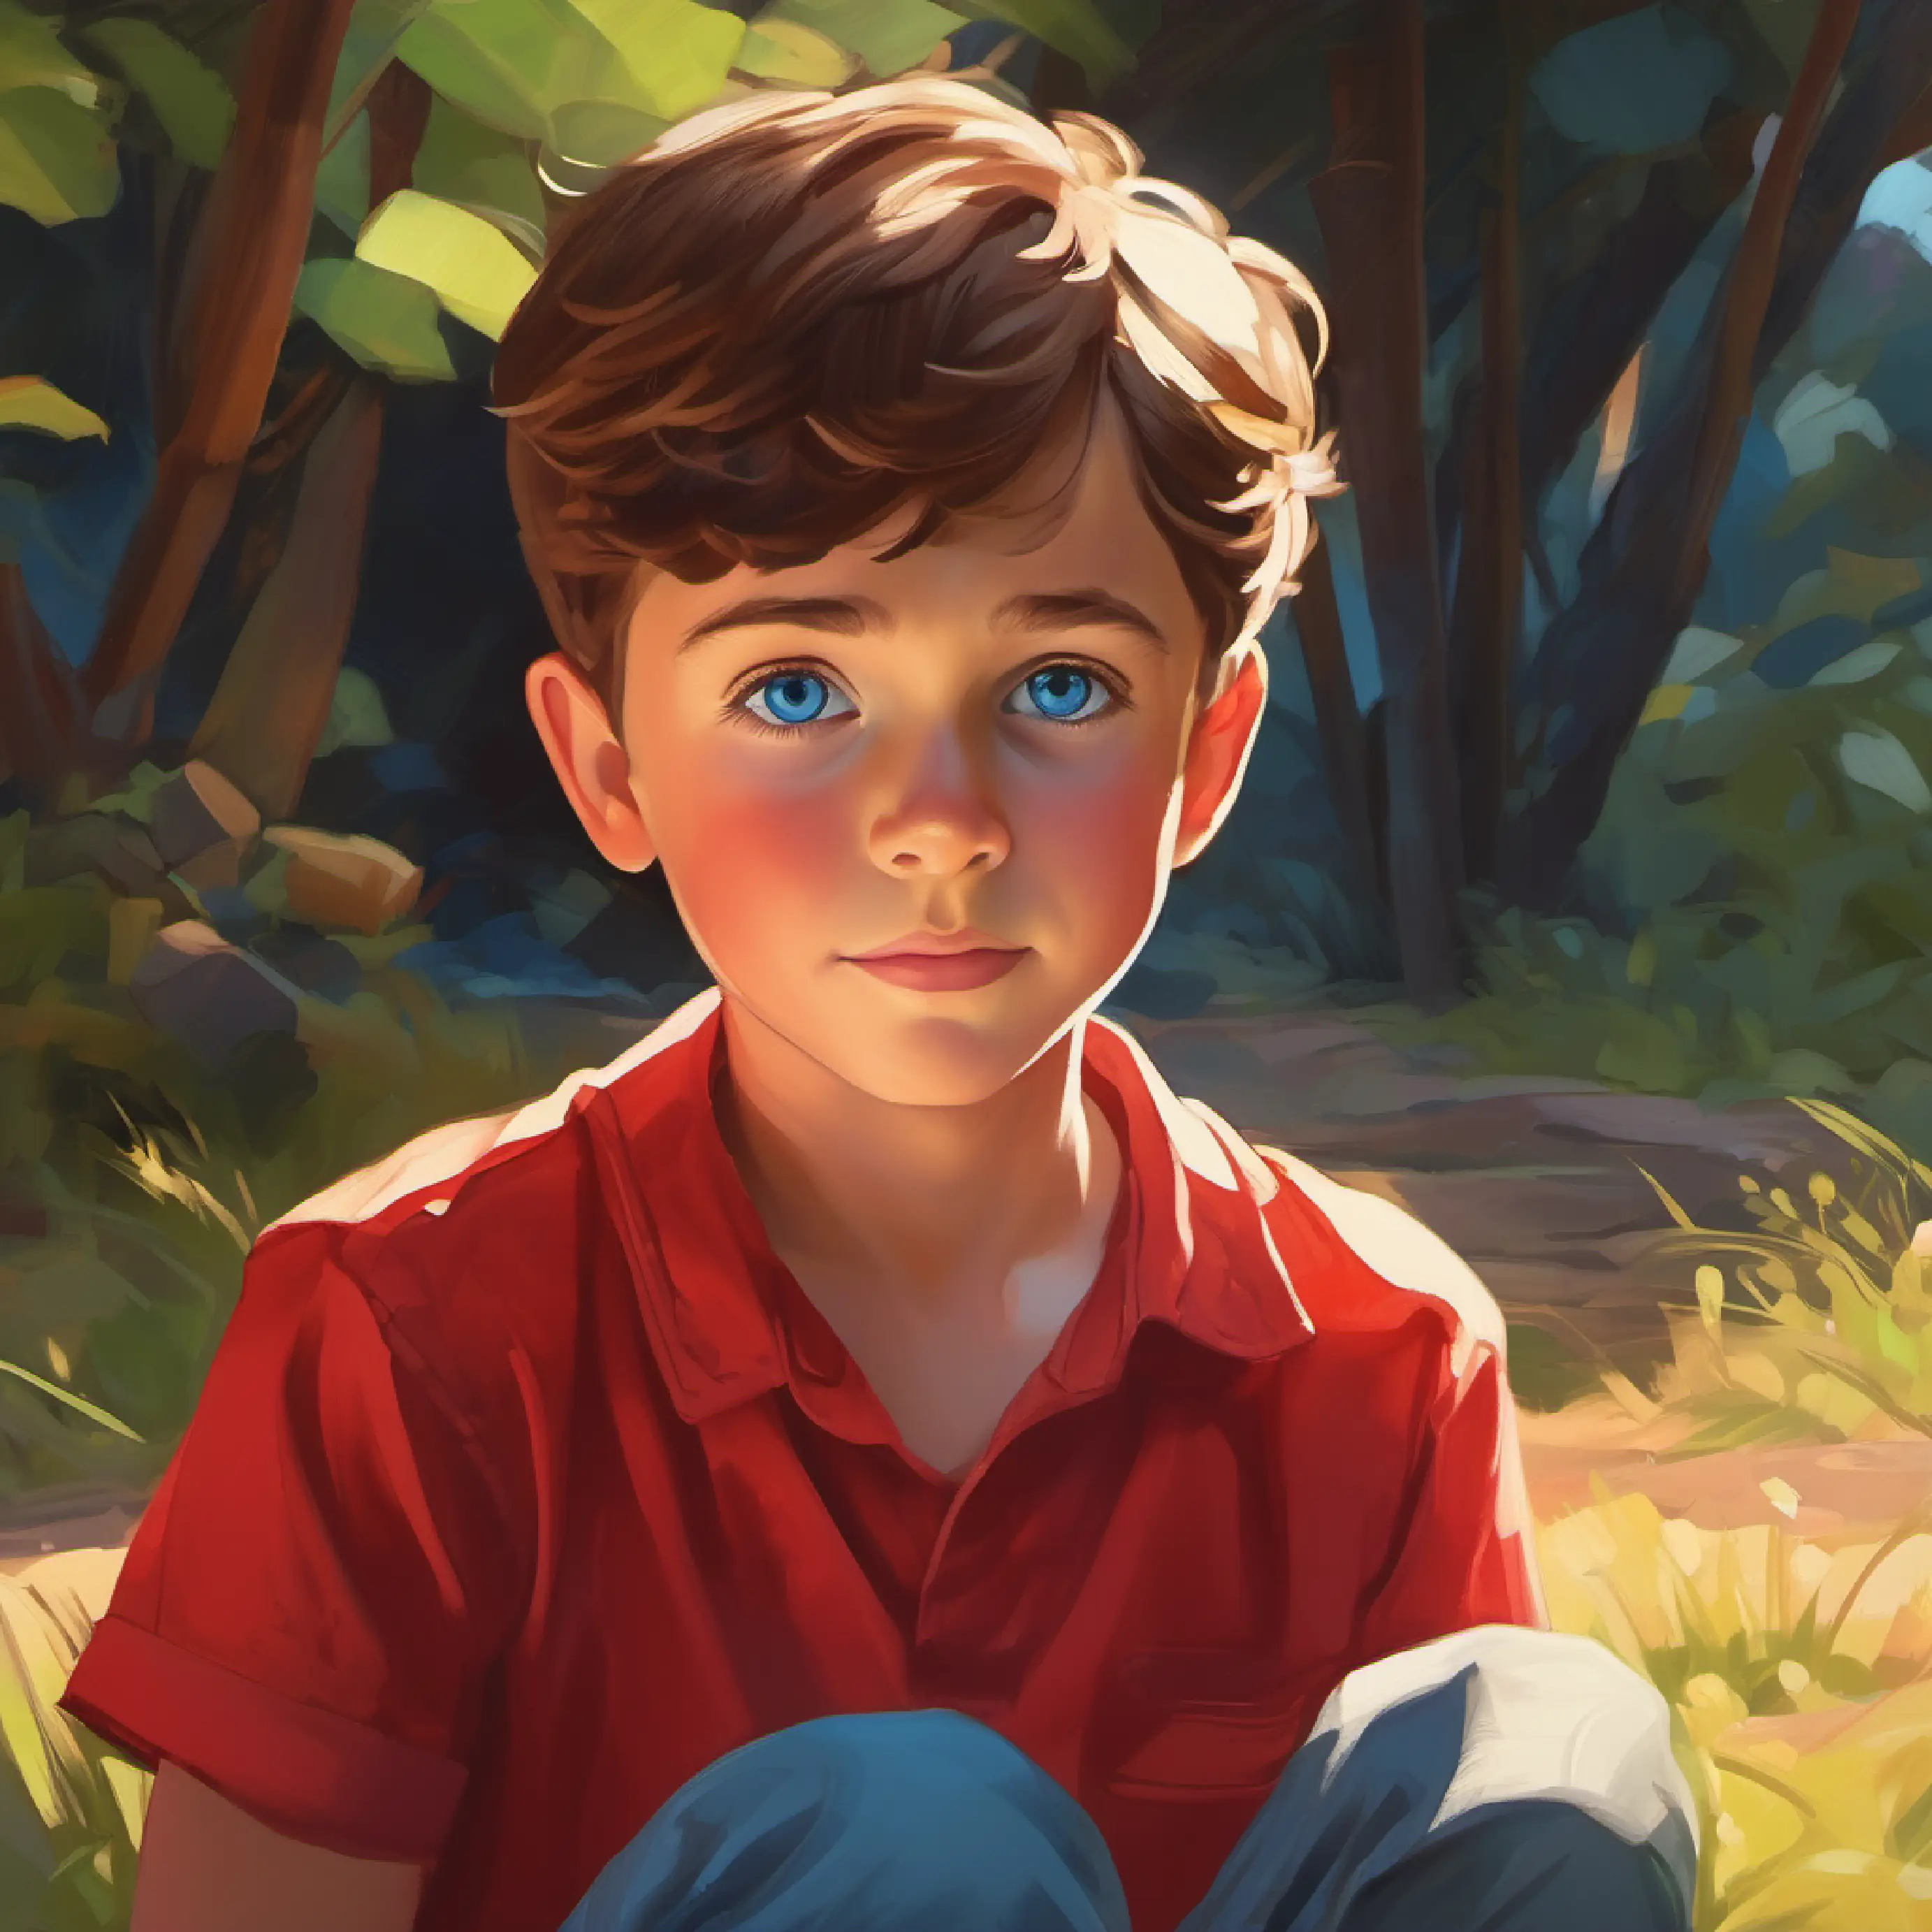 Young boy, short brown hair, bright blue eyes, wearing a red shirt reflects on his accomplishments with newfound confidence.